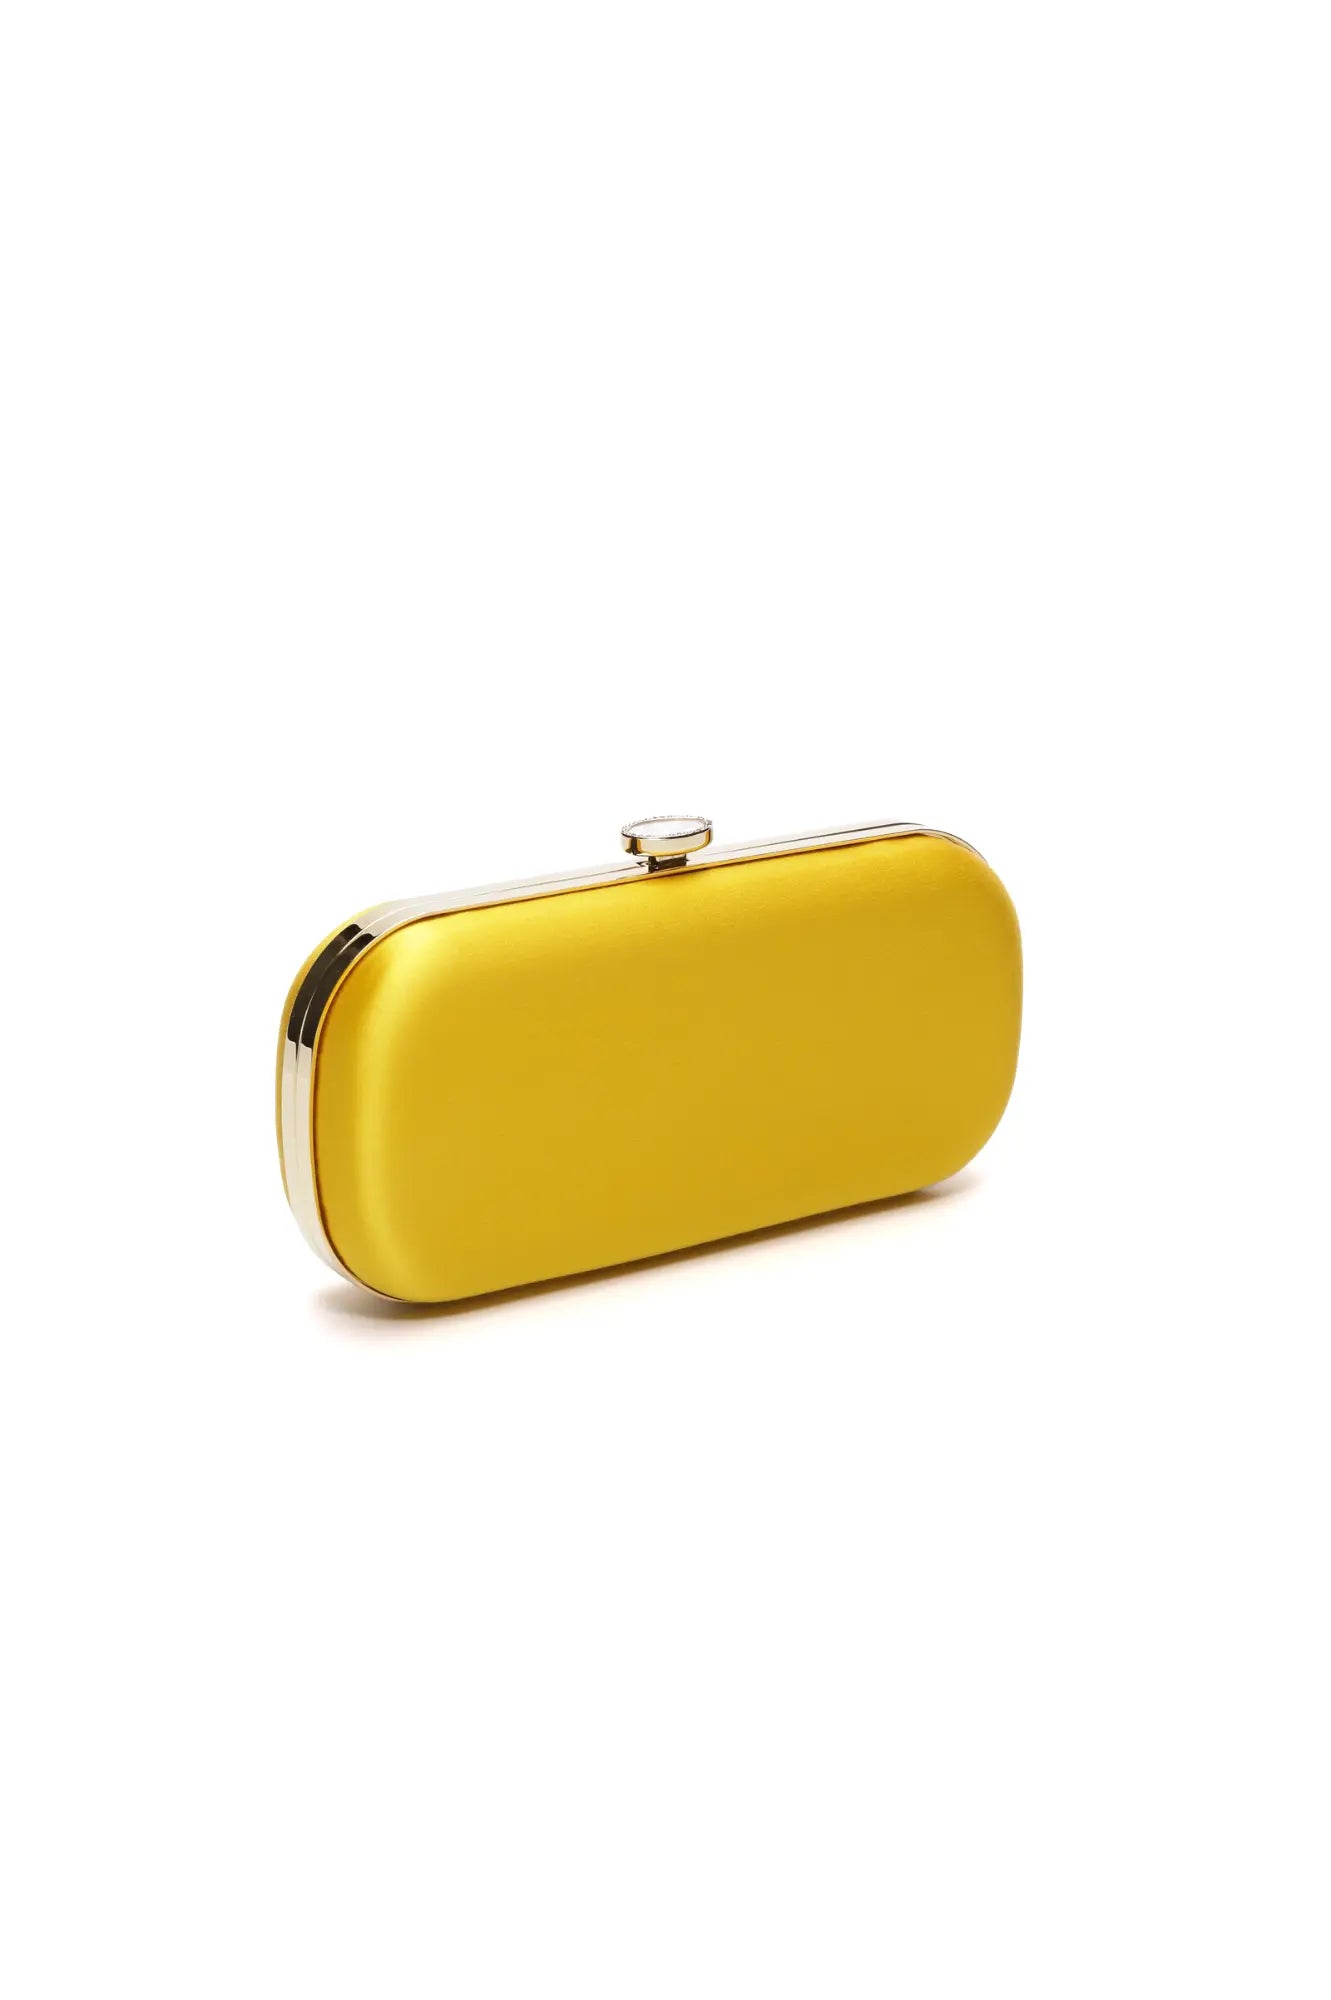 Bella Rosa Collection's Bella Clutch Limoncello Yellow Petite isolated on a white background.